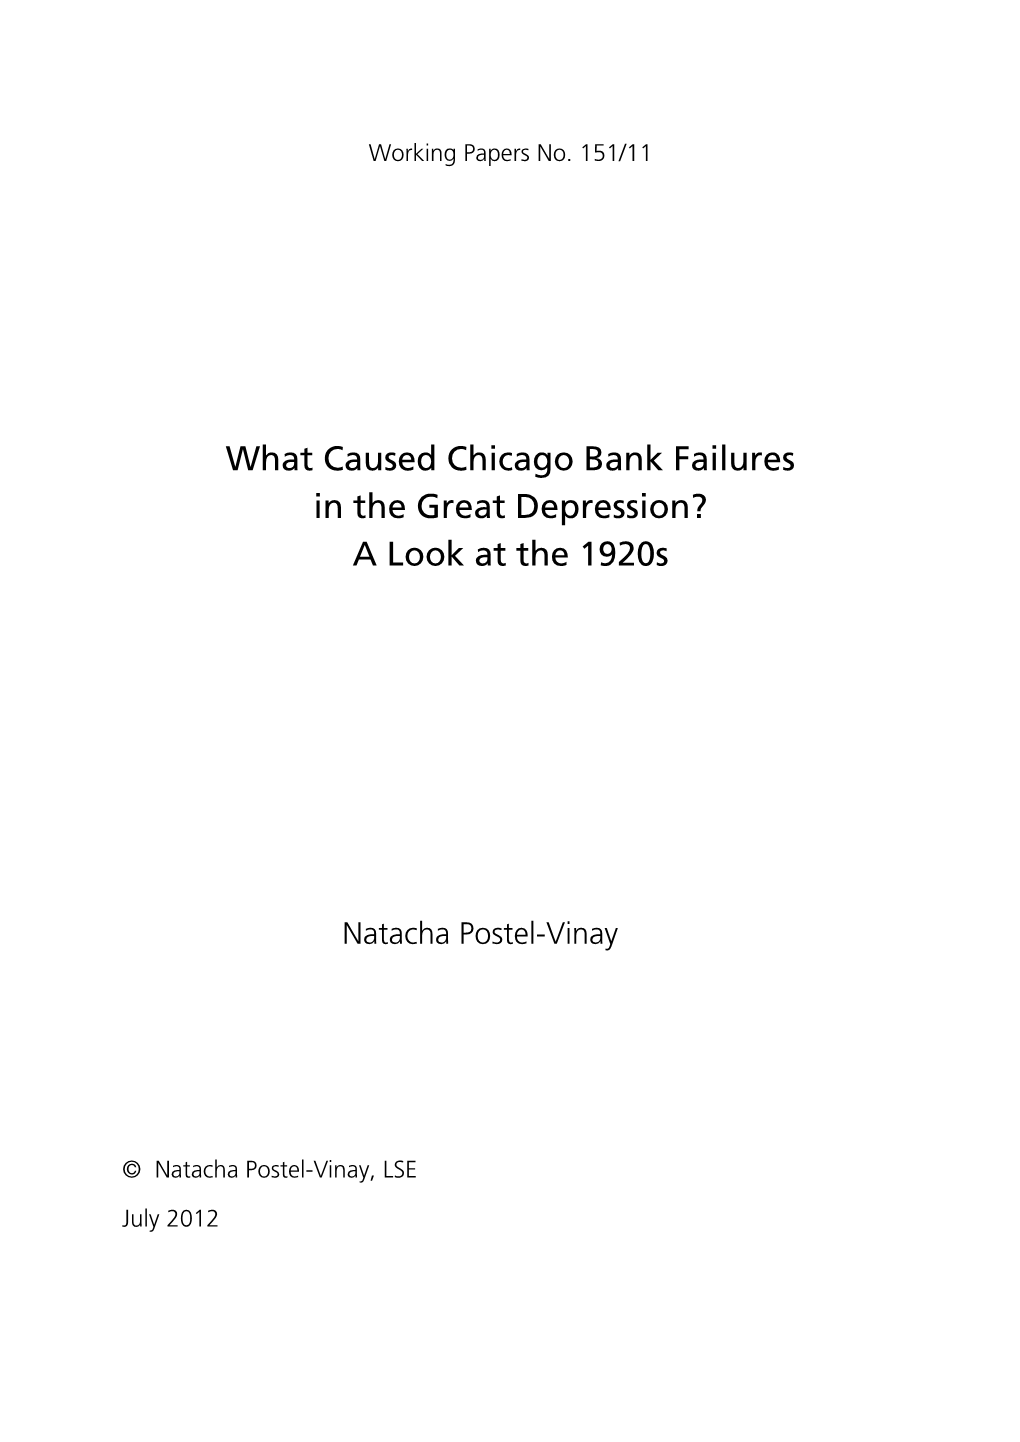 What Caused Chicago Bank Failures in the Great Depression? a Look at the 1920S